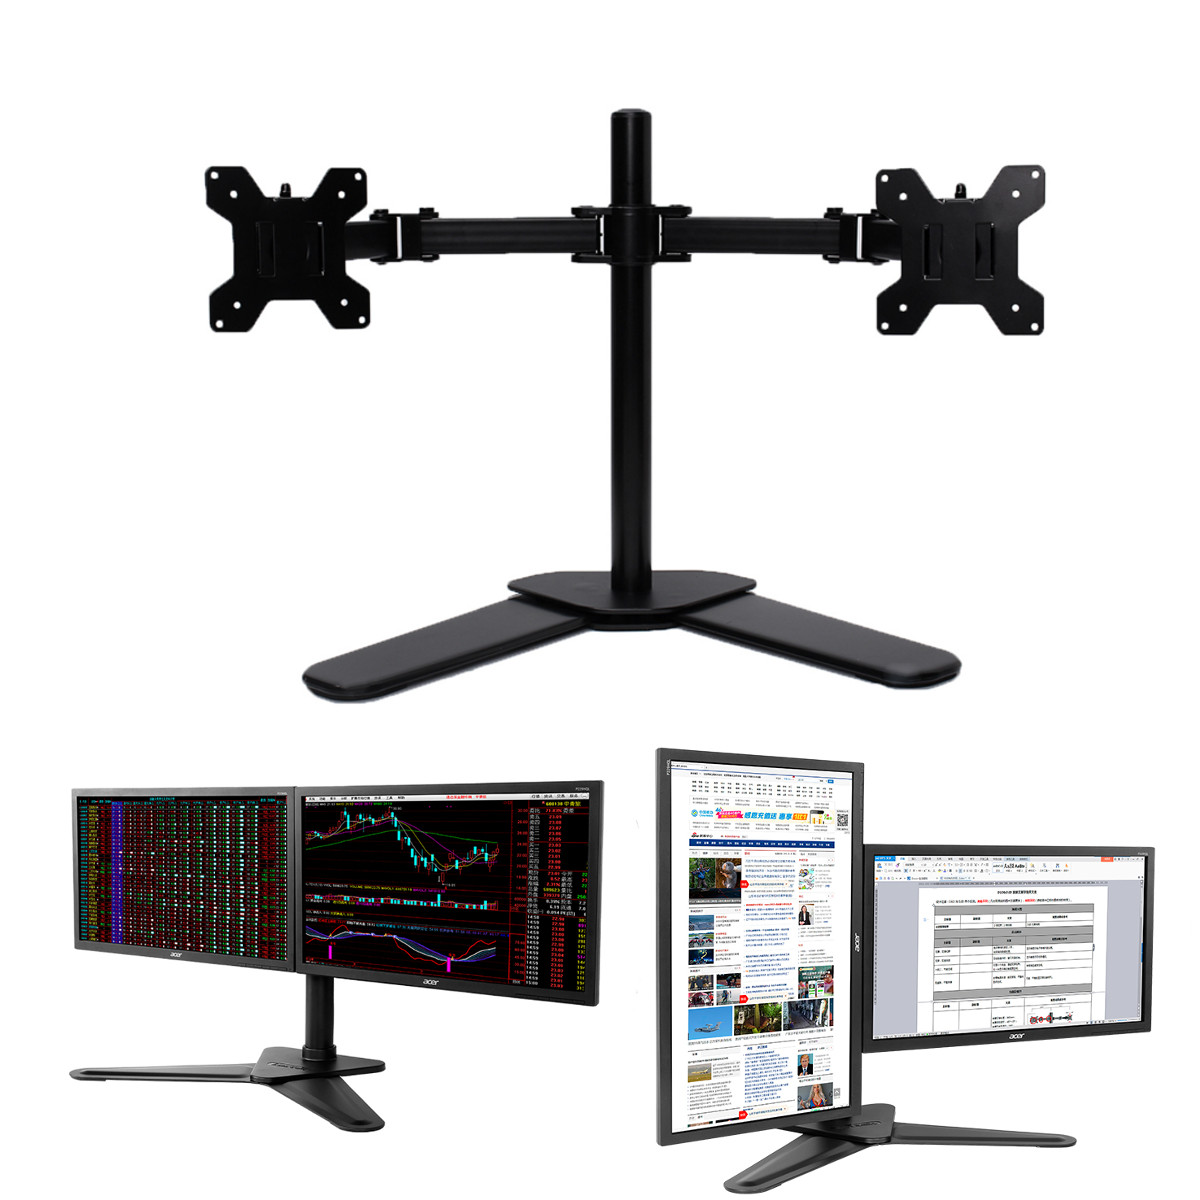 Dual LCD Monitor Holder Monitor Bracket Desk Stand for 10' to 27' Monitor